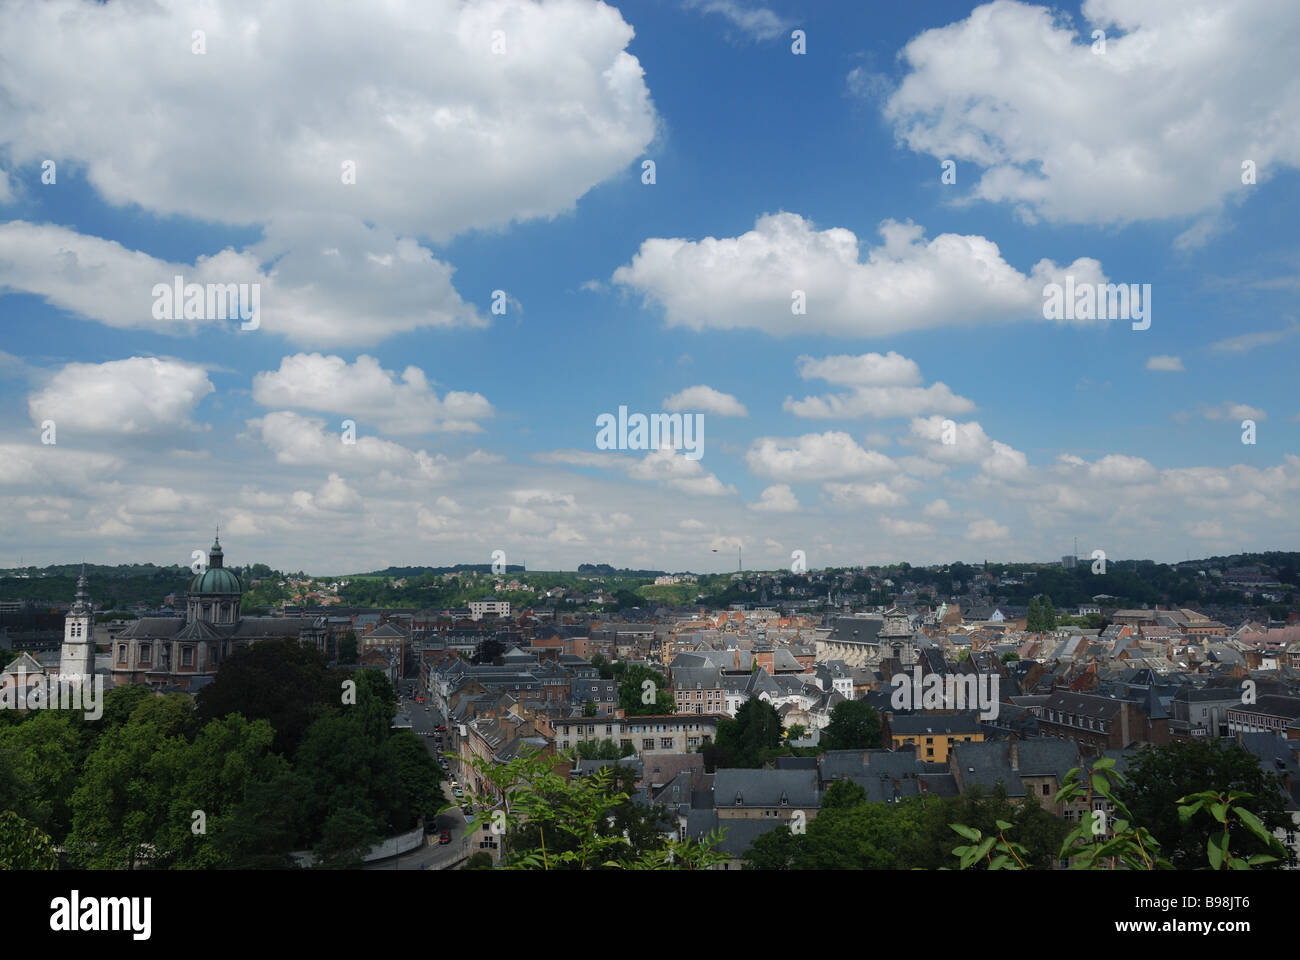 View over the city of Namur in Belgium, taken from the citadel on a sunny day. Stock Photo